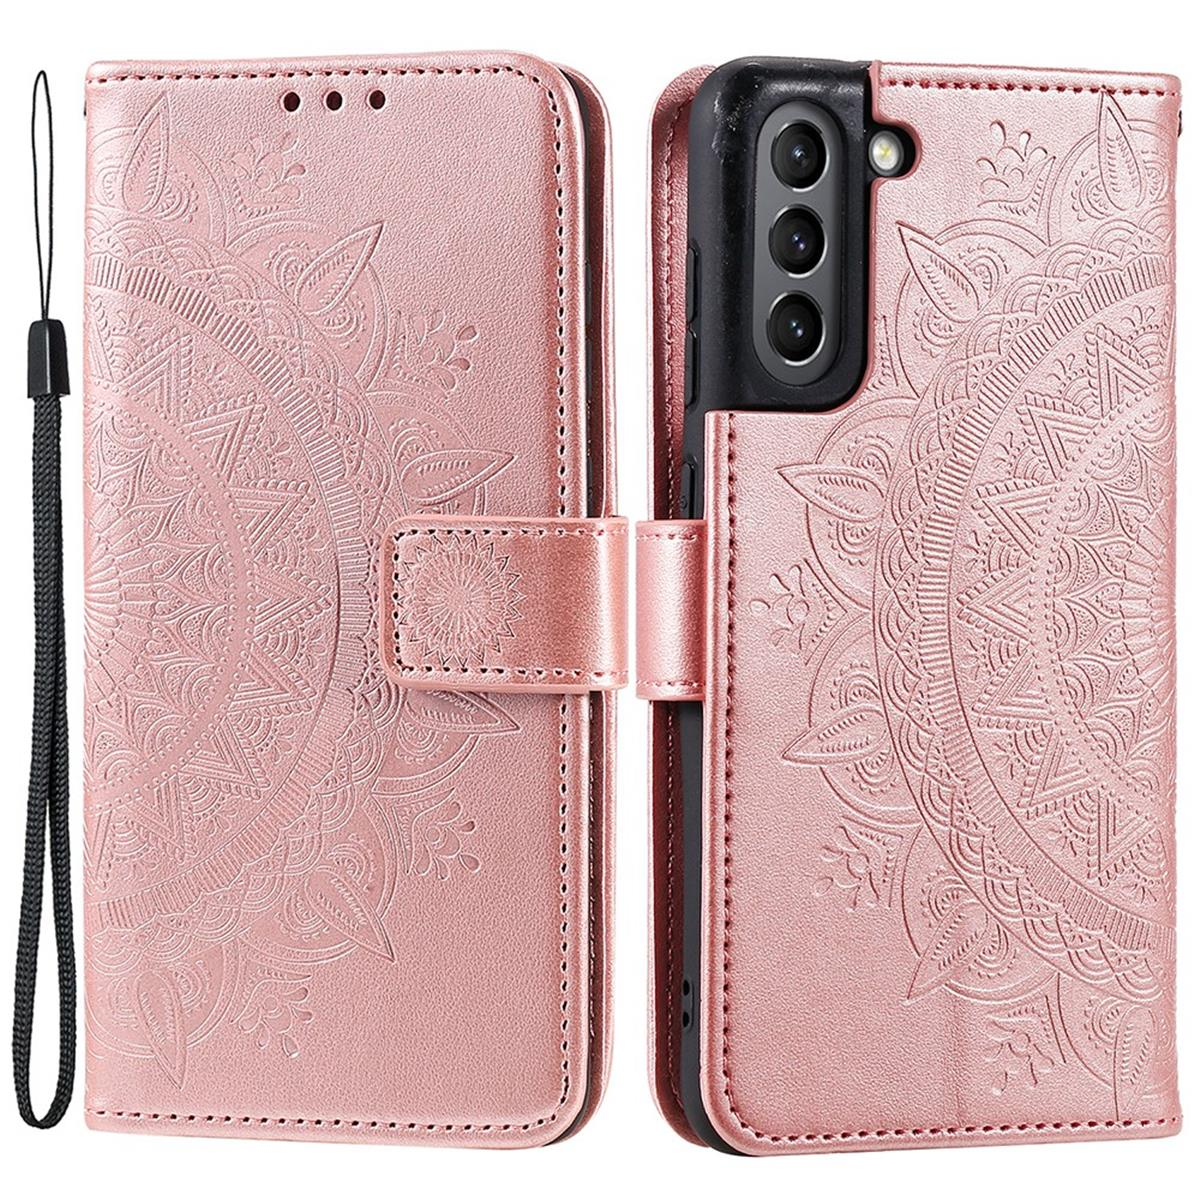 FE, mit Mandala Roségold S21 Muster, COVERKINGZ Bookcover, Galaxy Klapphülle Samsung,